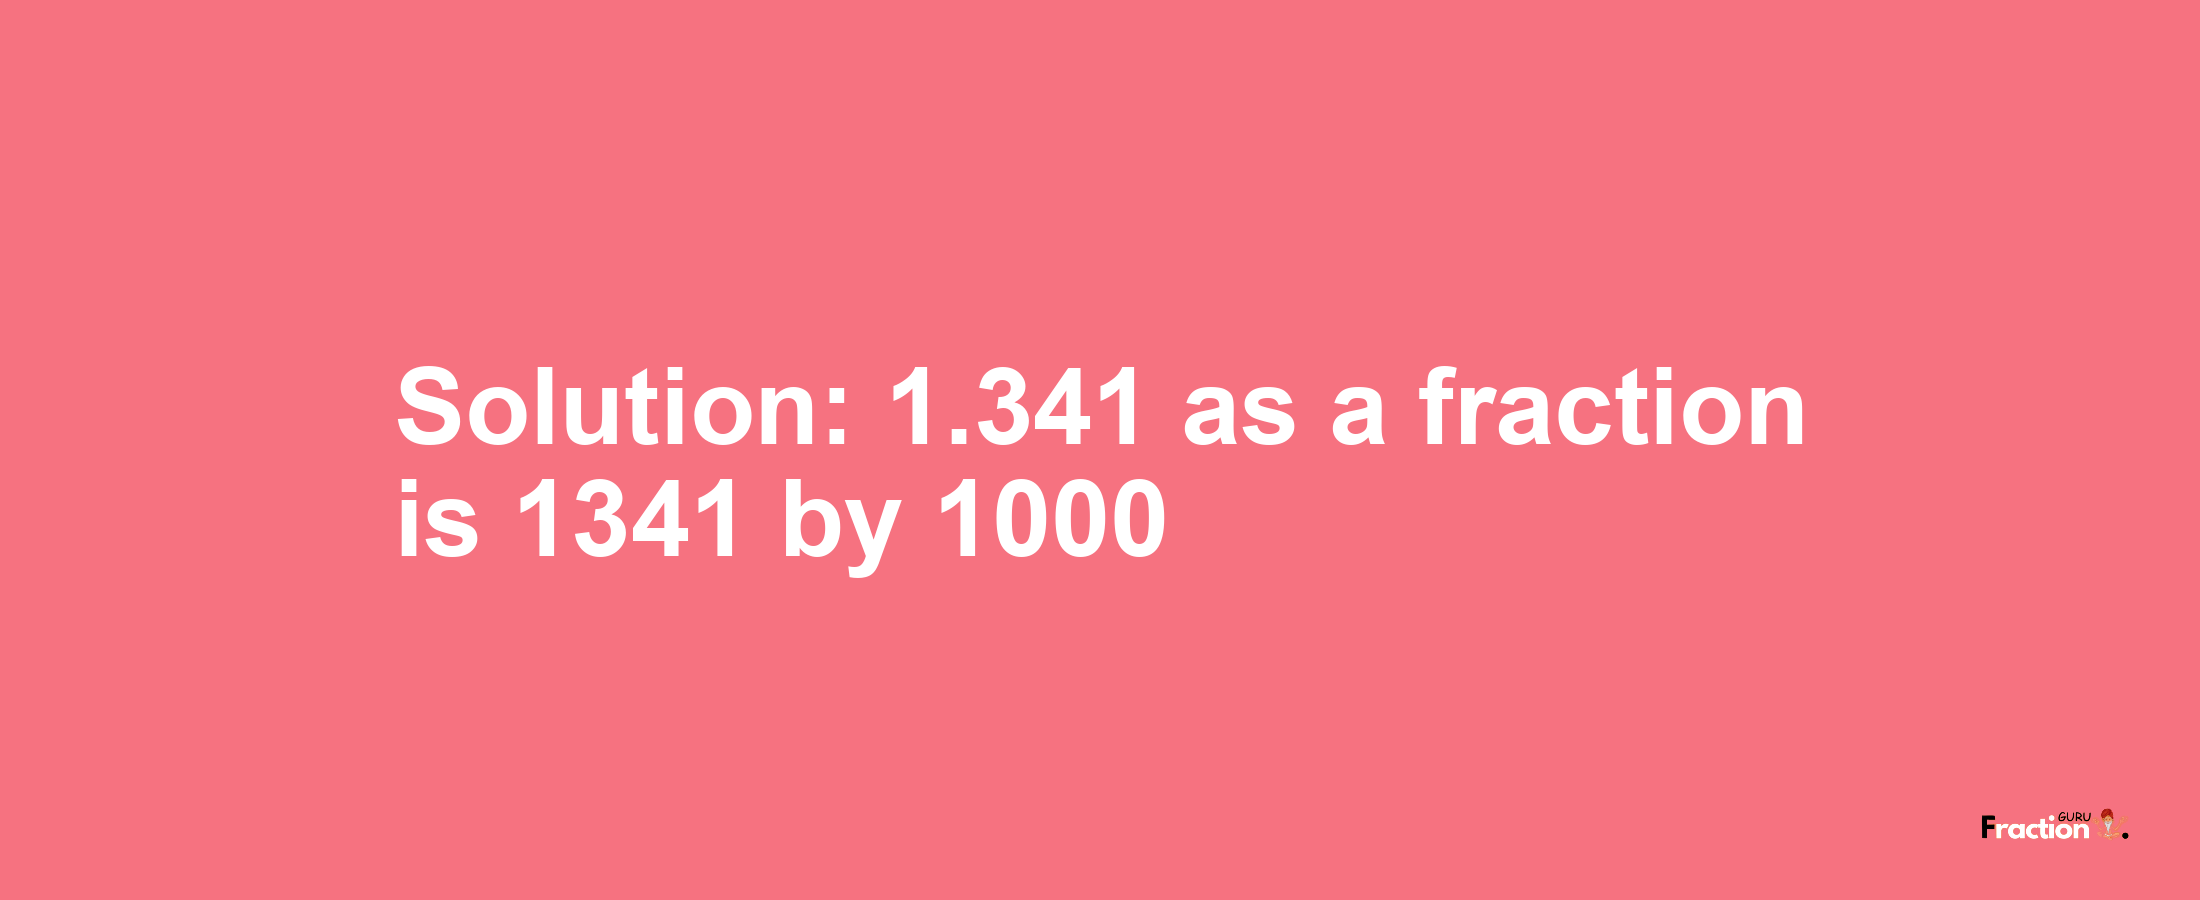 Solution:1.341 as a fraction is 1341/1000